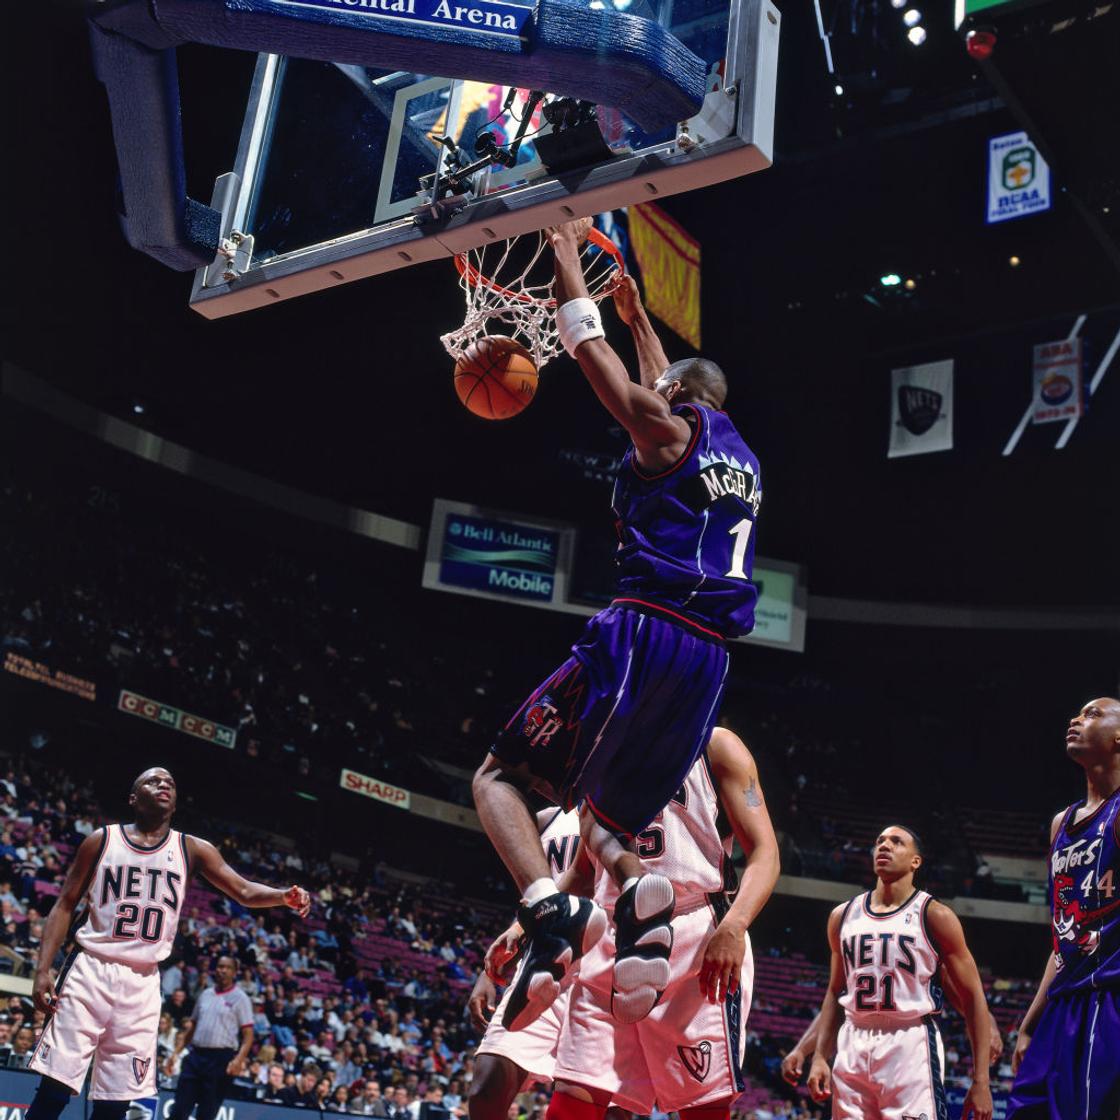 Mcgrady is one of the best dunkers of all time.